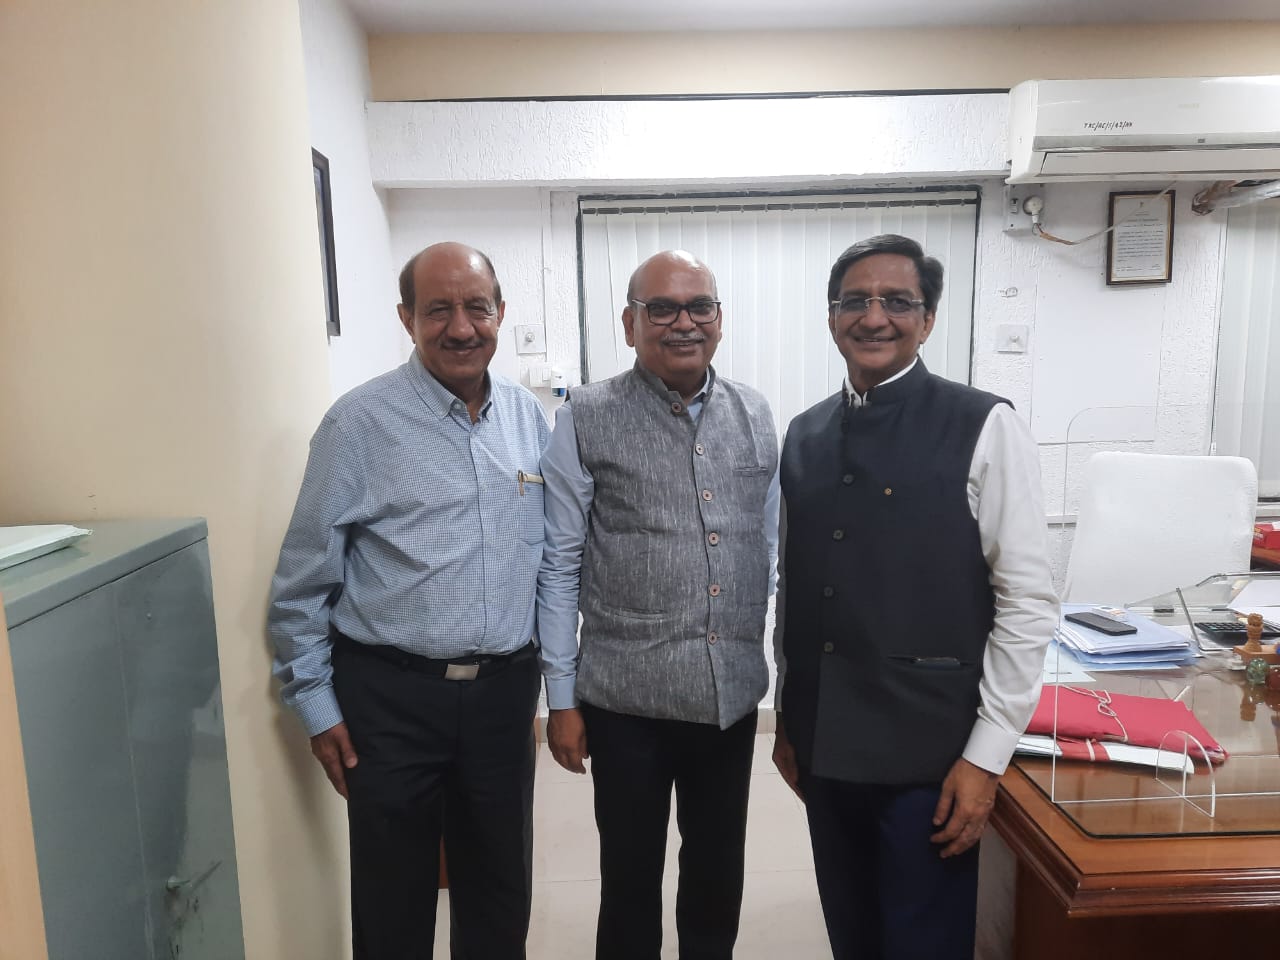 S P Verma - Joint Textile Commissioner being greeted by Shri Sunil Patwari, Chairman and Shri Vijay Kumar Agarwal, Vice Chairman on 20th October 2022 at Mumbai